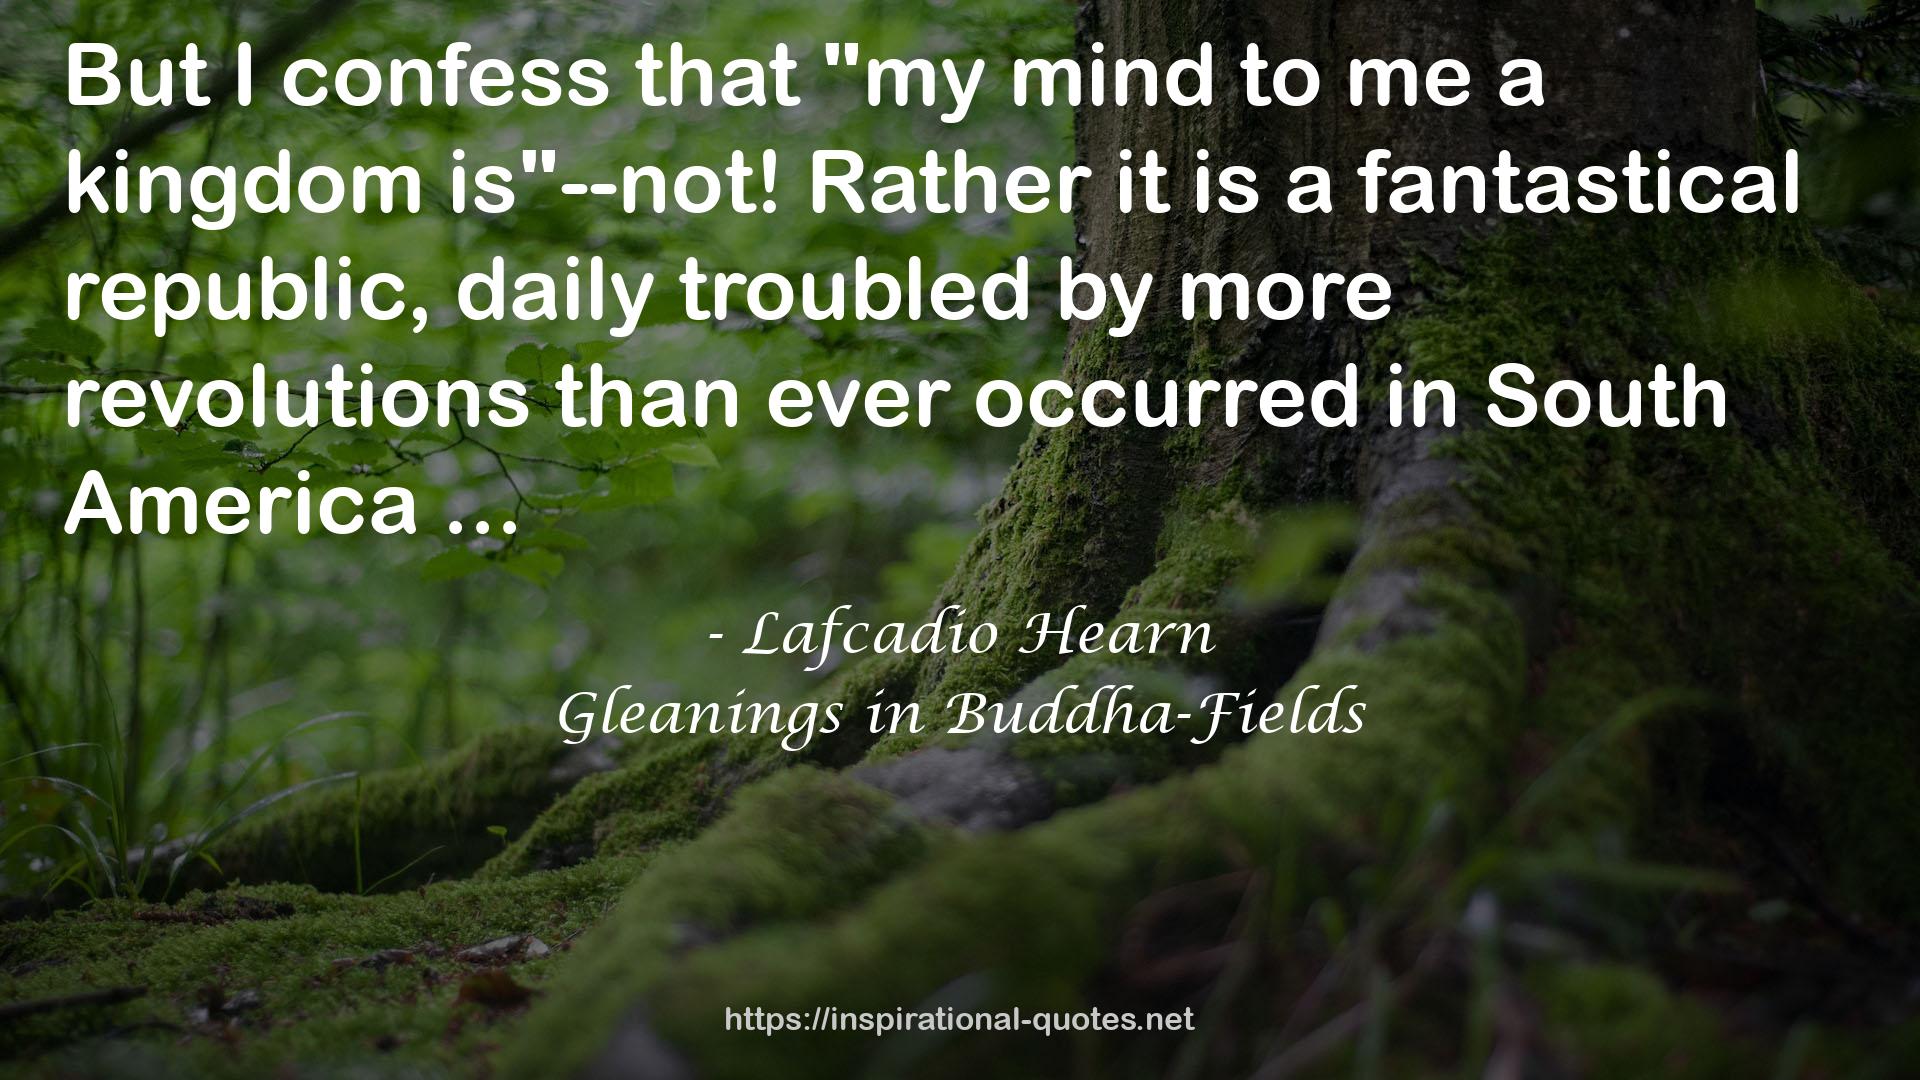 Gleanings in Buddha-Fields QUOTES